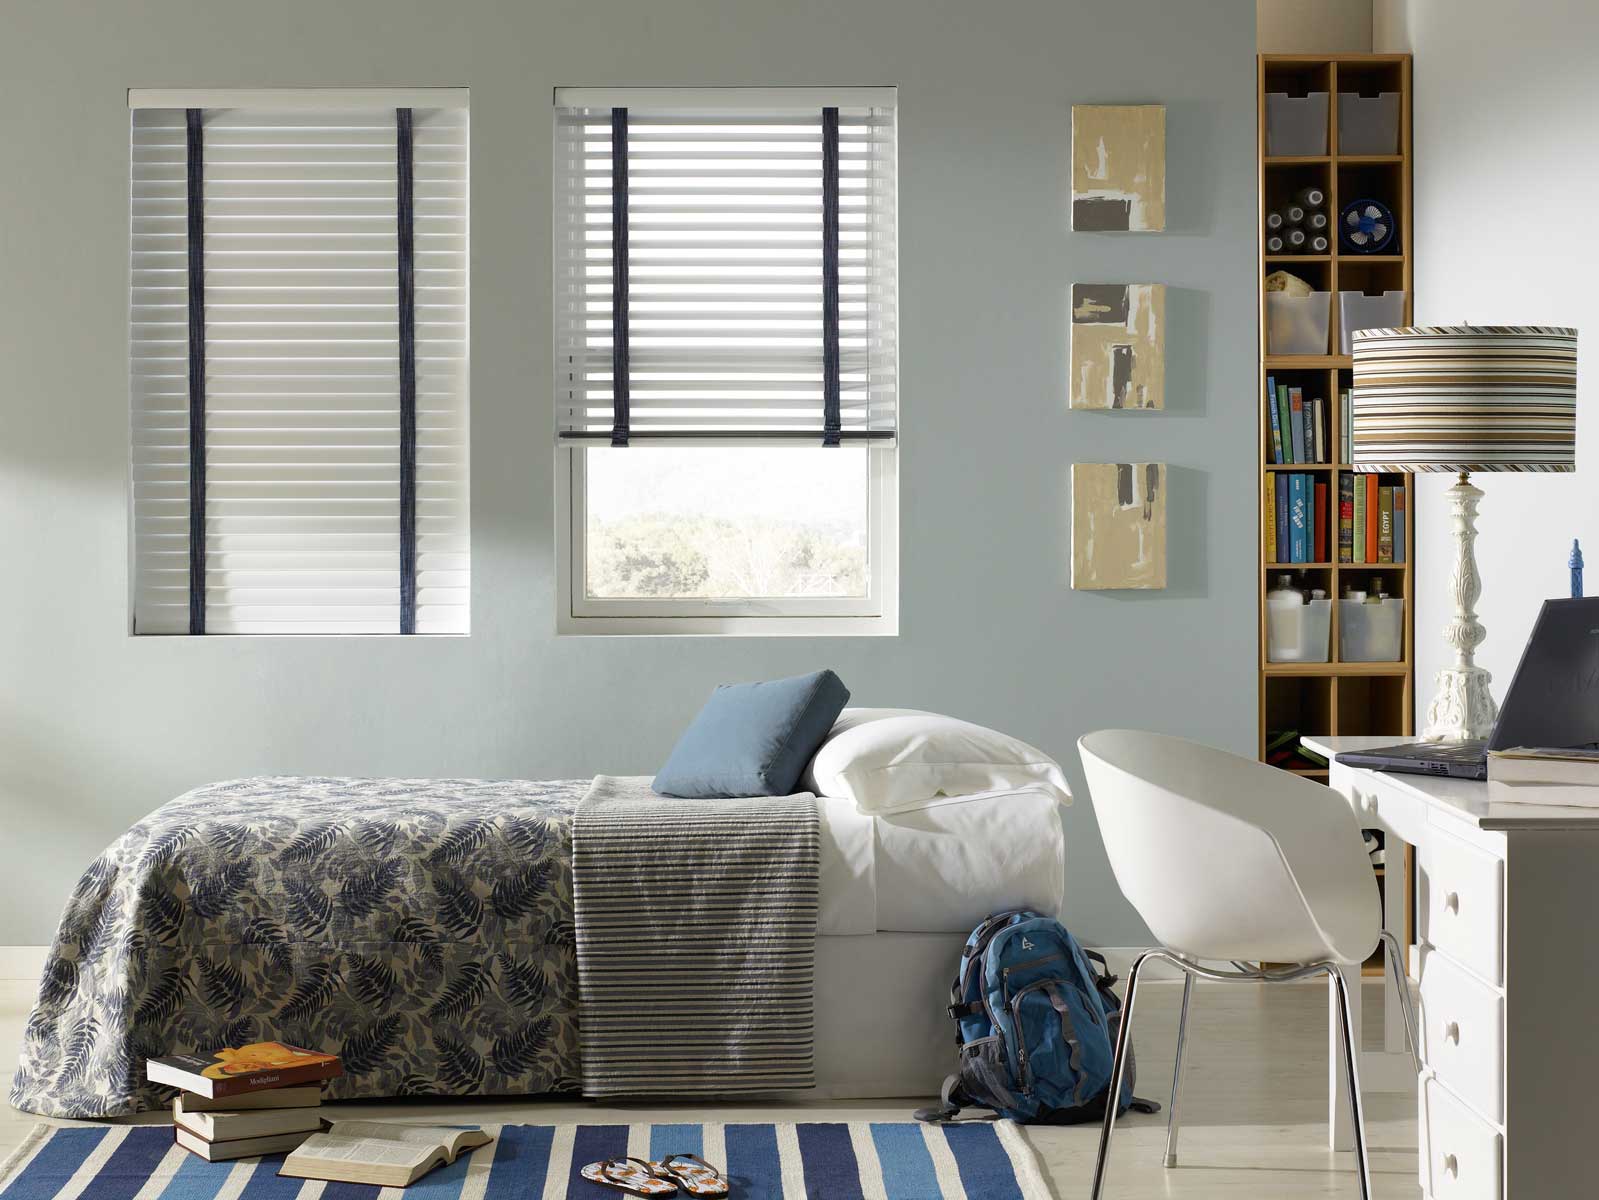 Two White Classic Collection Aluminum Blinds with Denim Banding and a Bed with Select Masterpieces Bedding